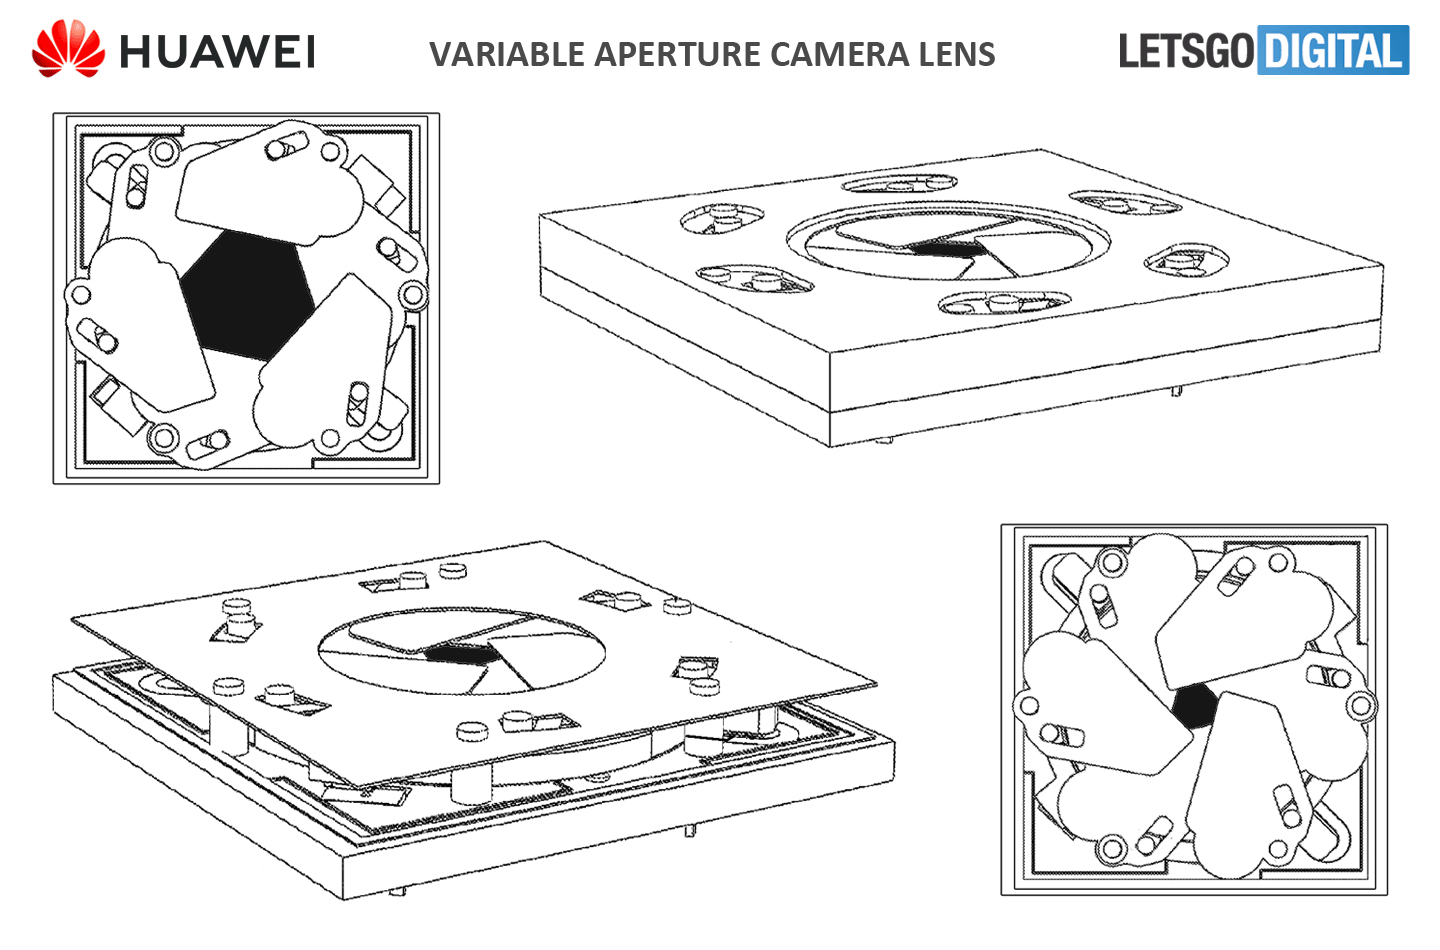 Huawei Camera with variable aperture-1